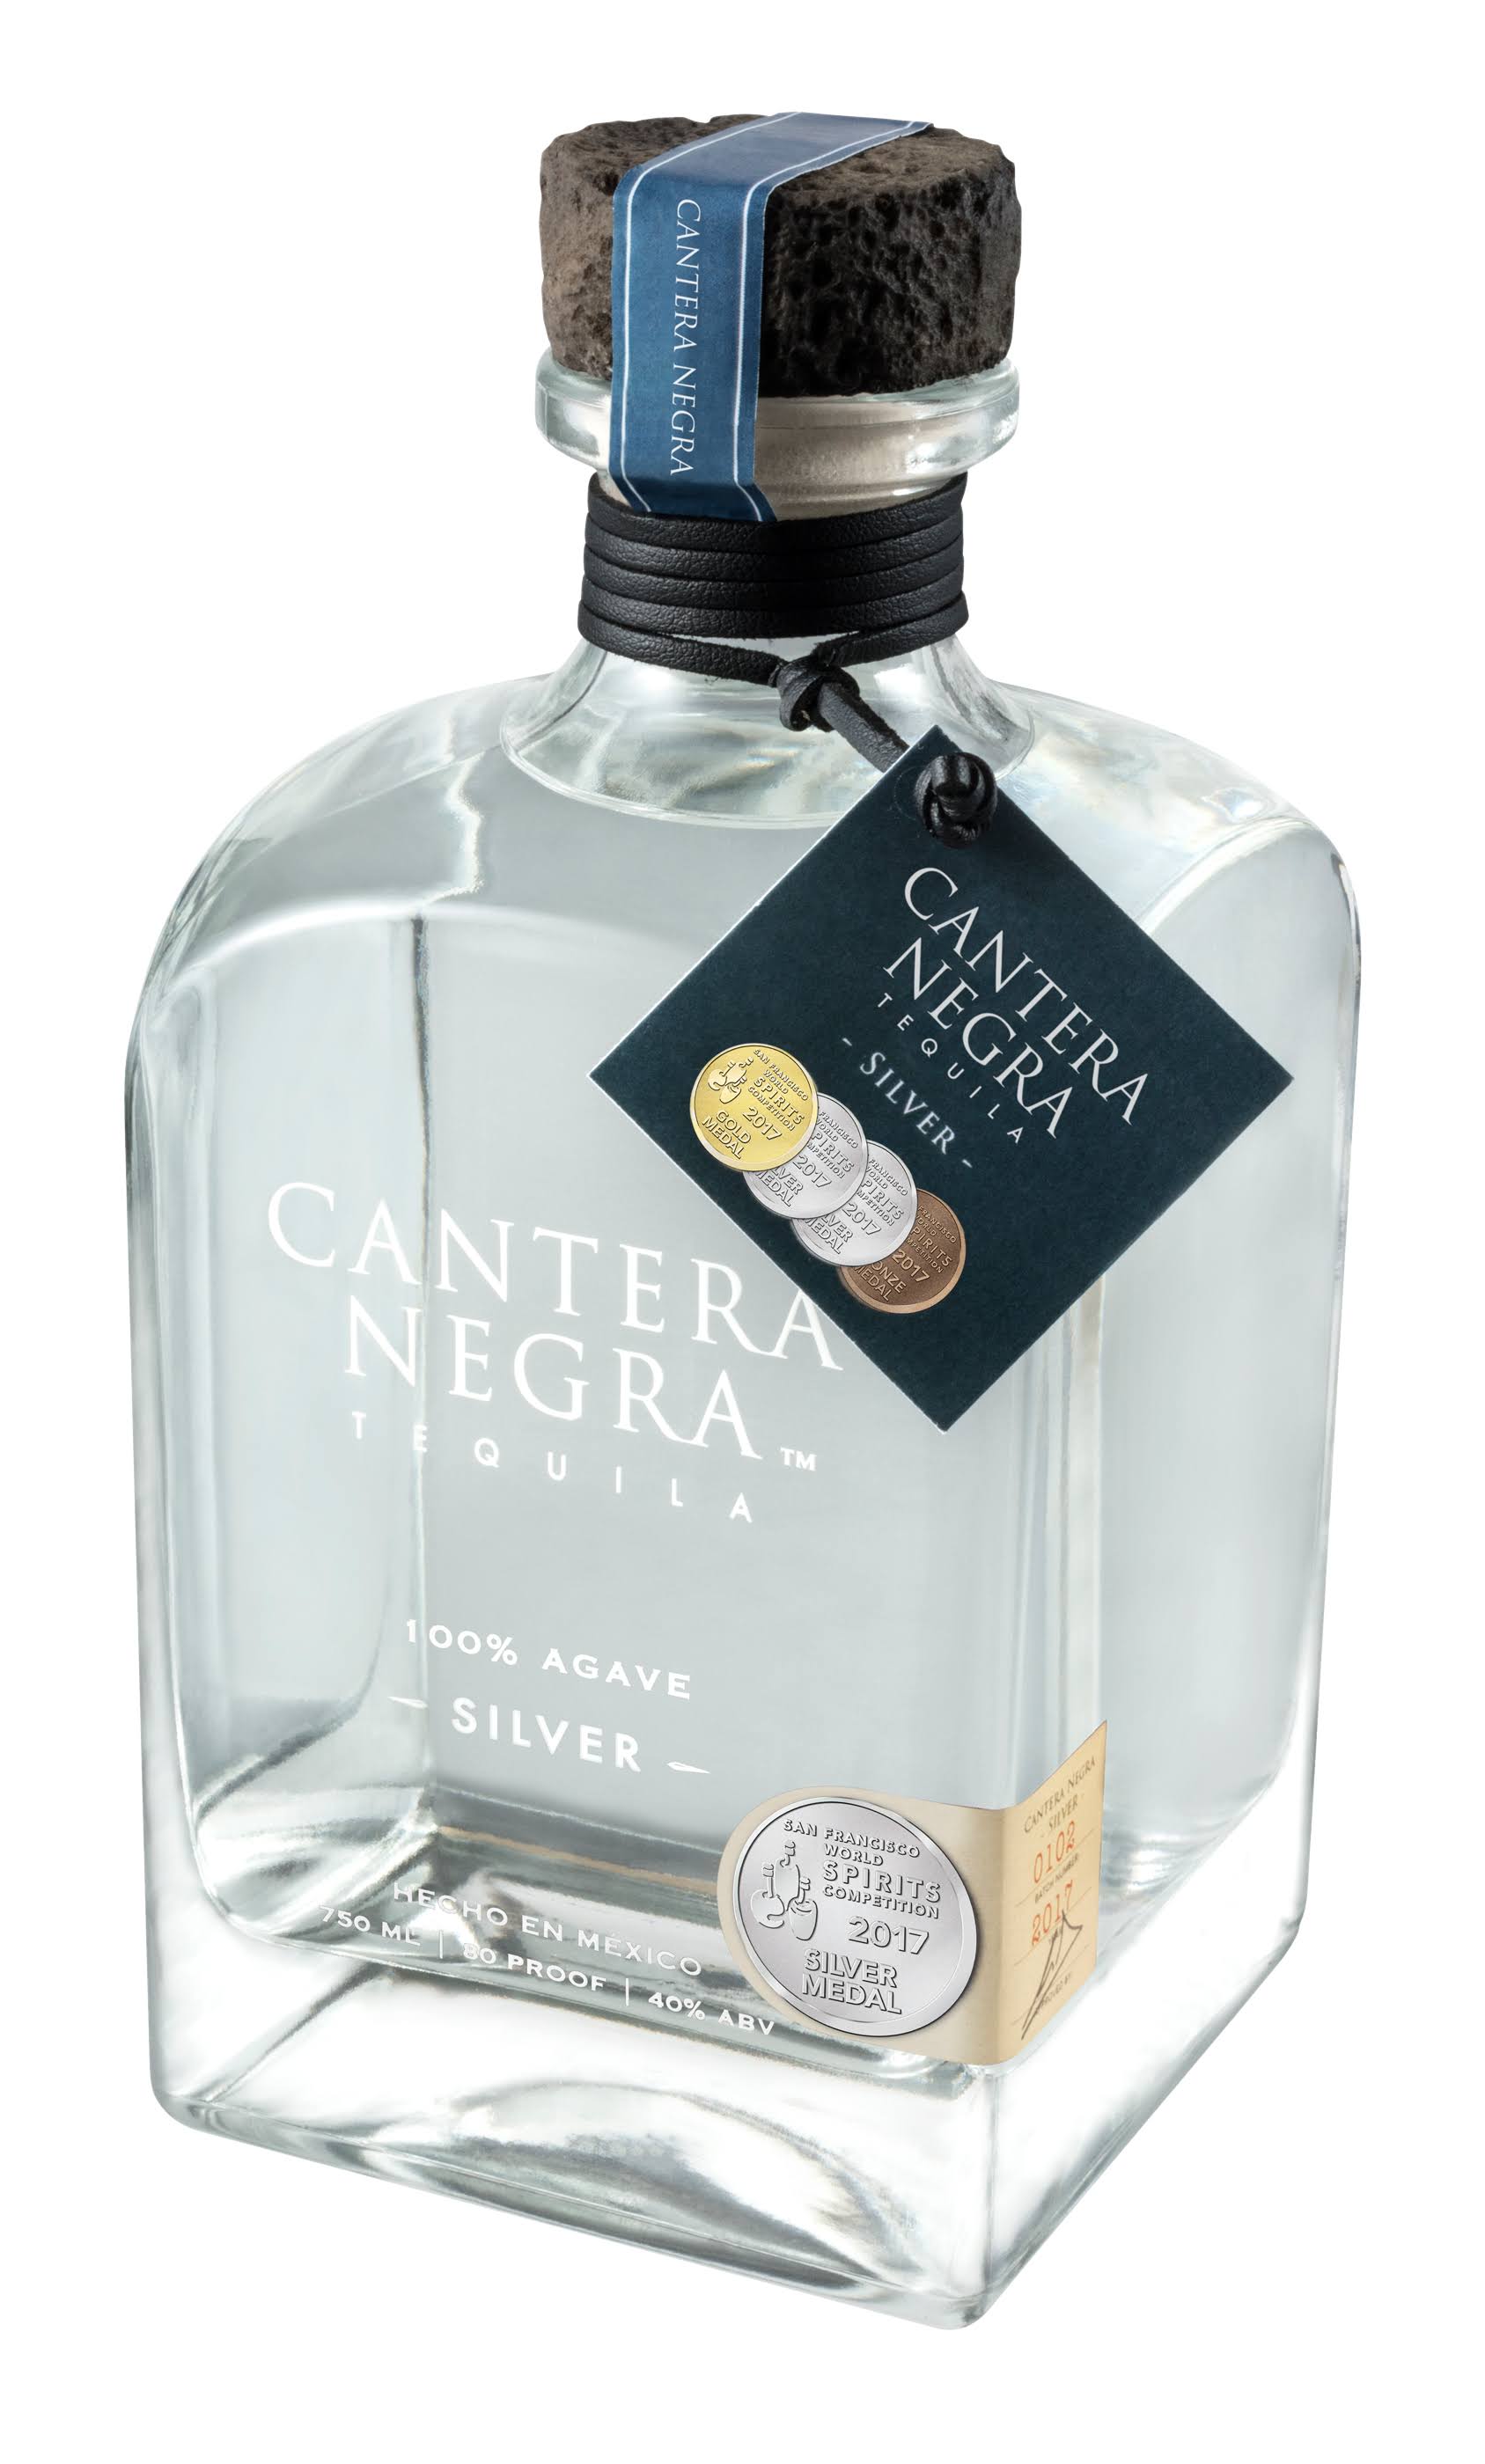 Cantera Negra Tequila, Silver, 100% Agave - 750 ml